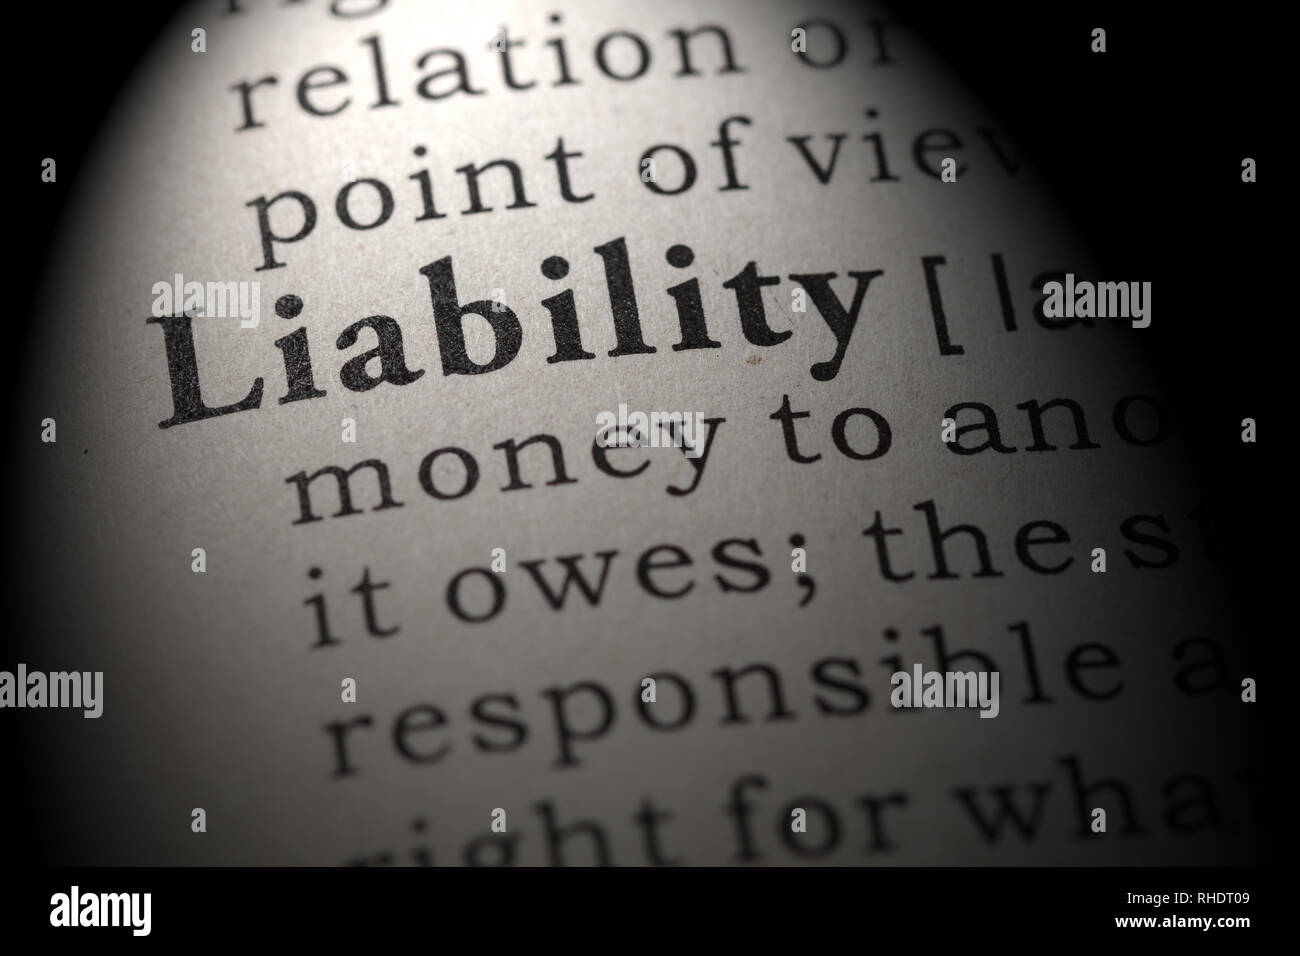 Fake Dictionary, Dictionary definition of the word liability. including key descriptive words. Stock Photo